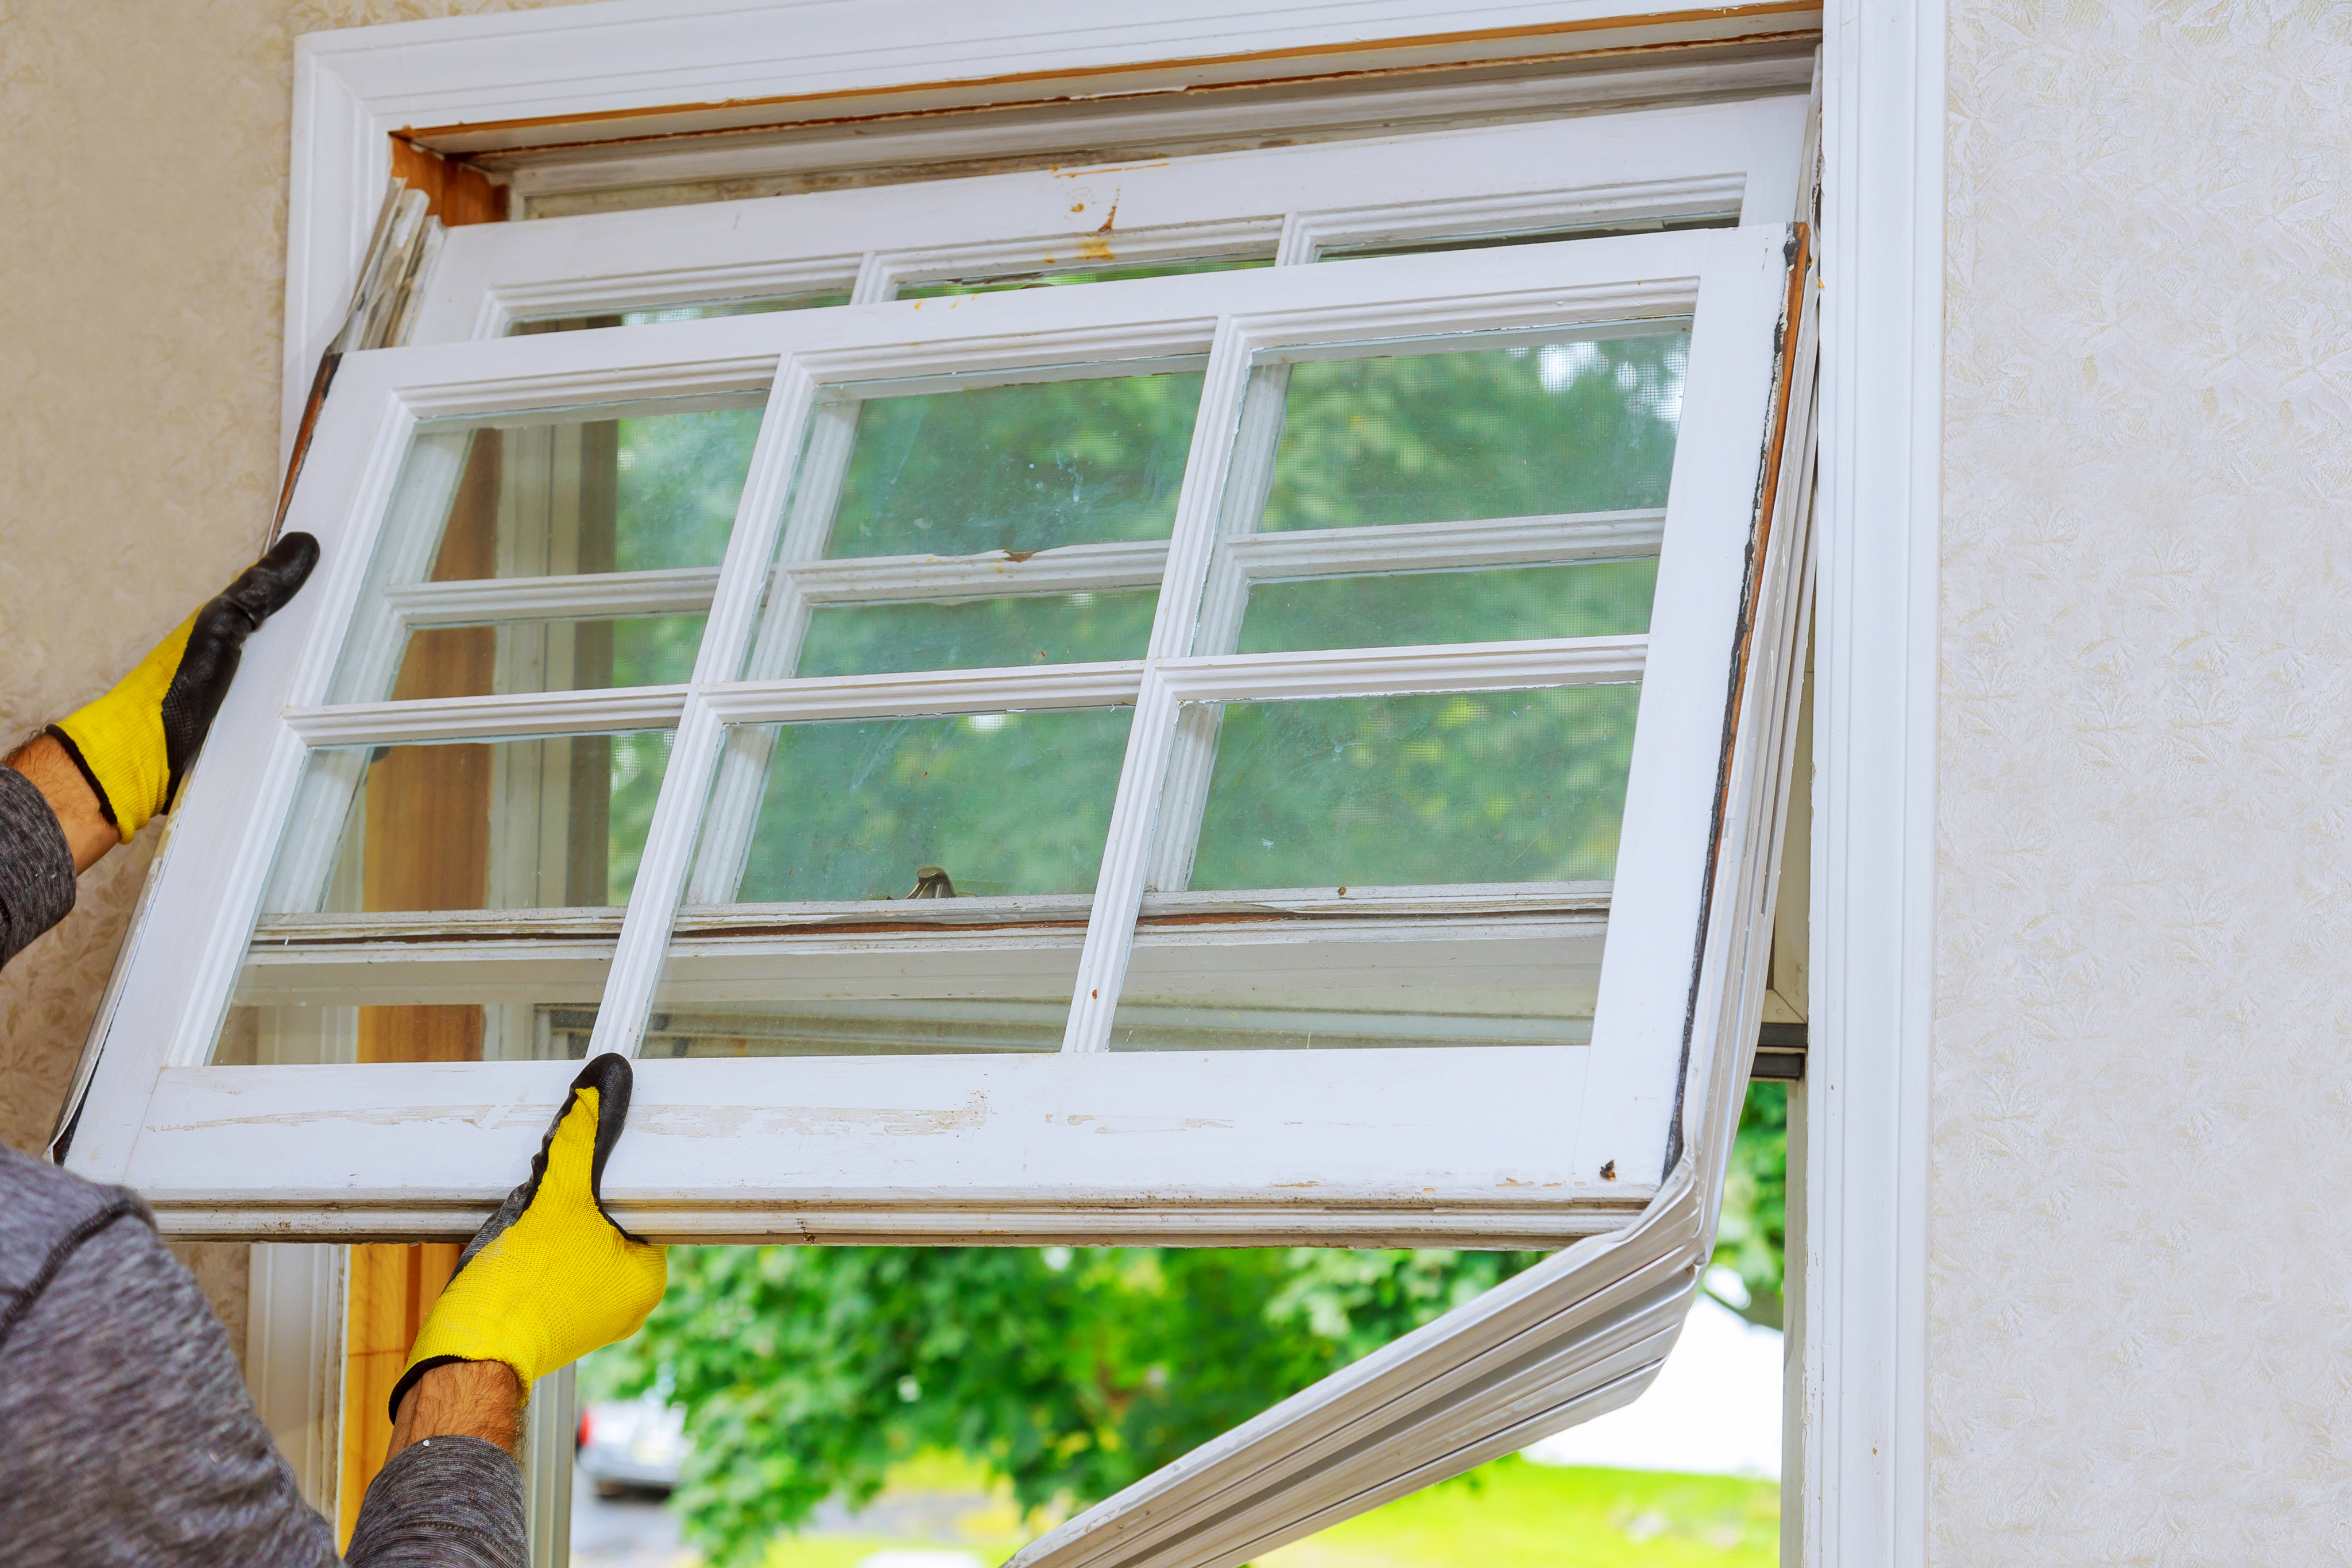 Should Your Repair or Replace Your Windows